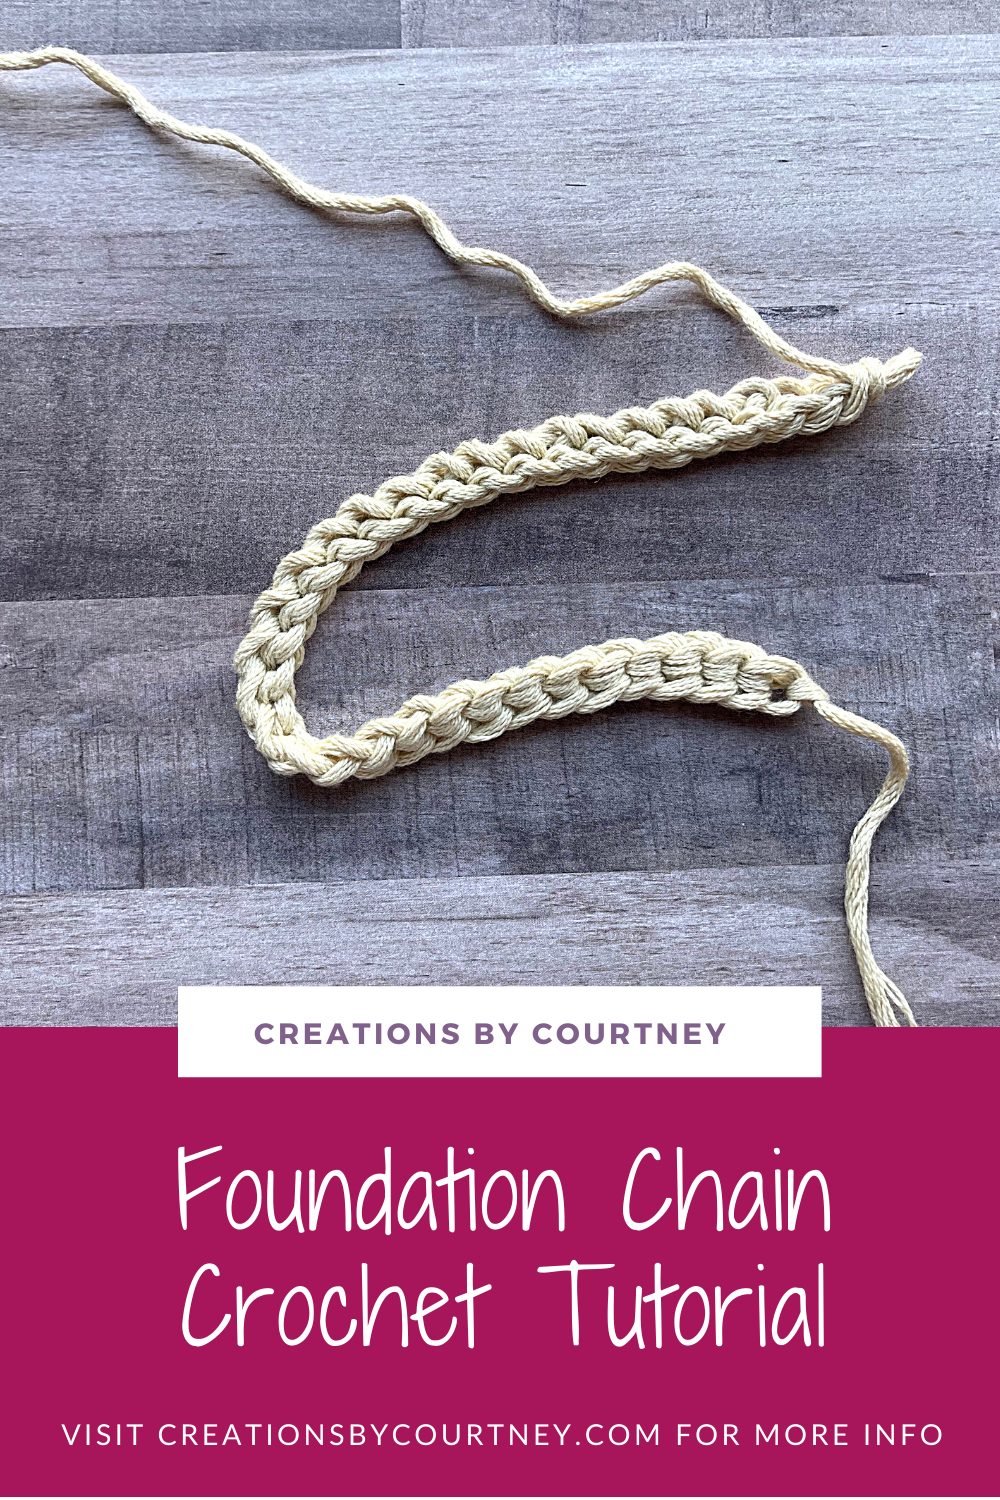 The foundation chain crochet tutorial is a great alternative to the standard chain or working slip stitches in a chain. It can be used for ties, belts and more.